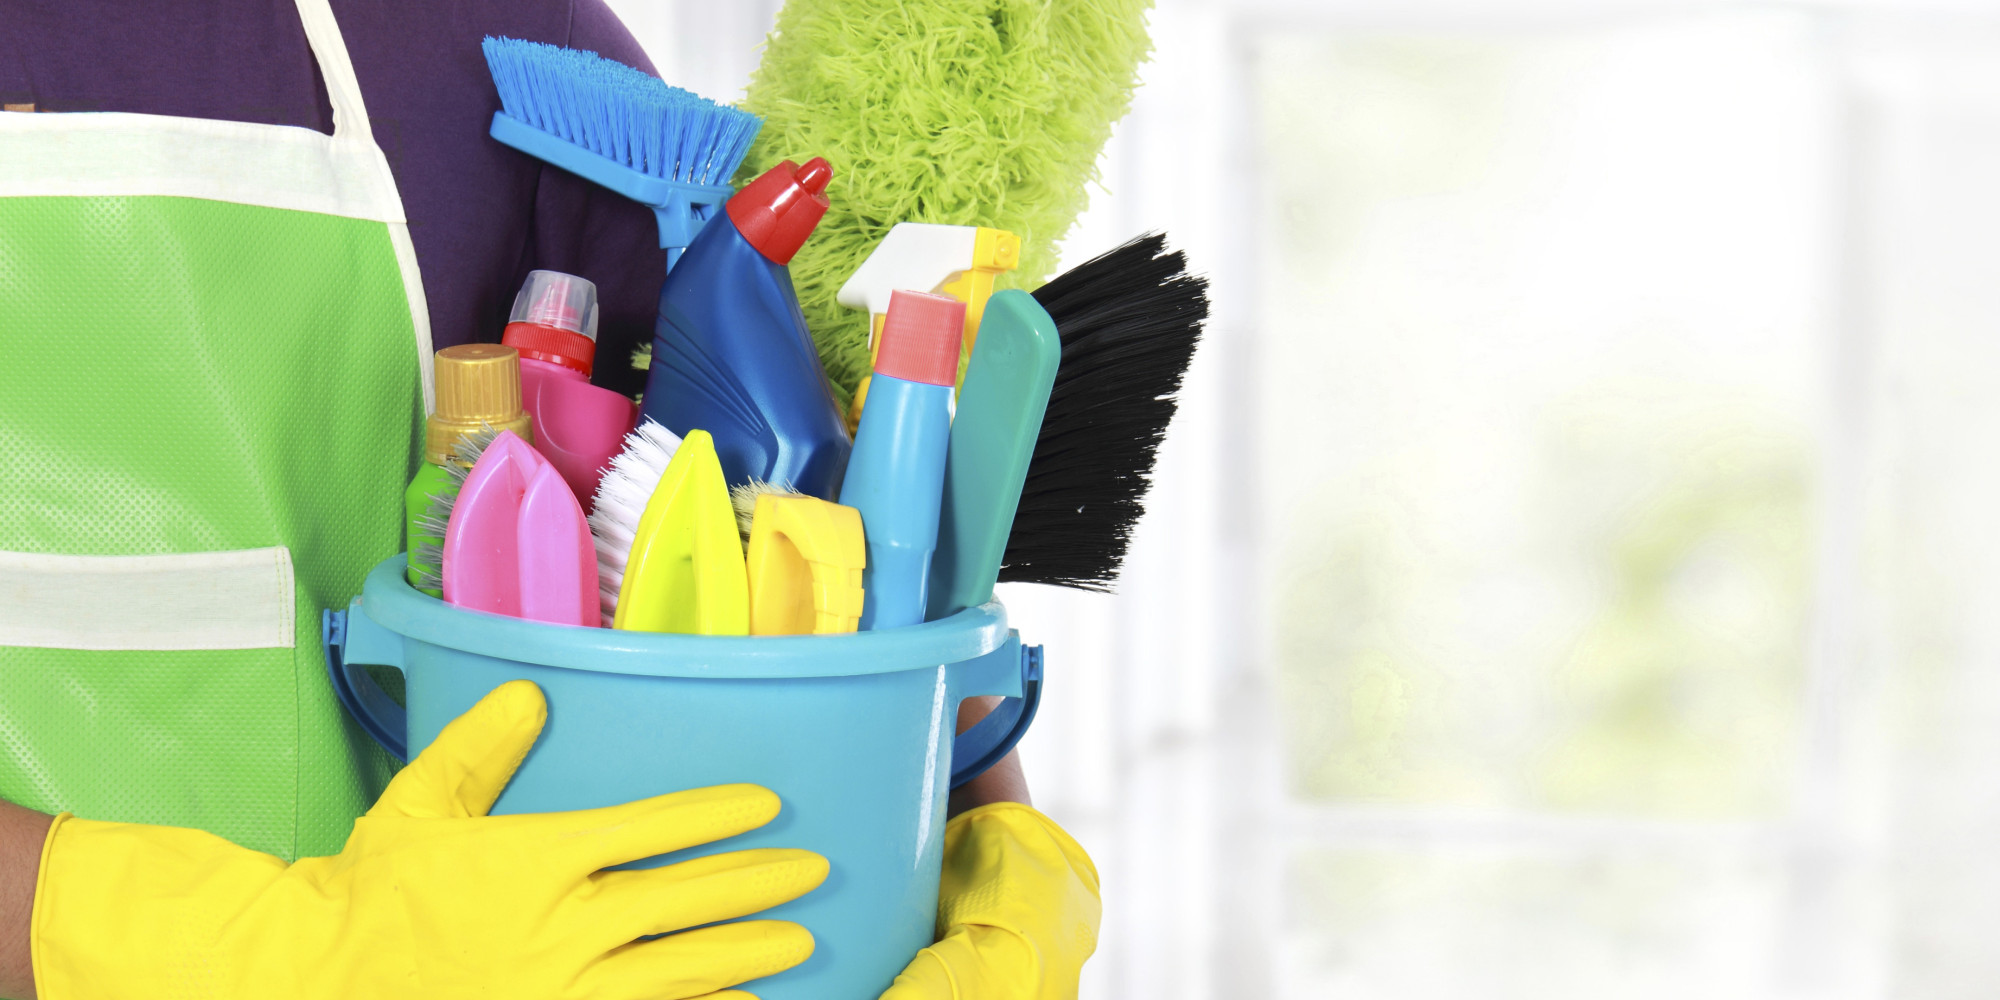 Here's How You Can Hire A Home Cleaning Service For The First Time